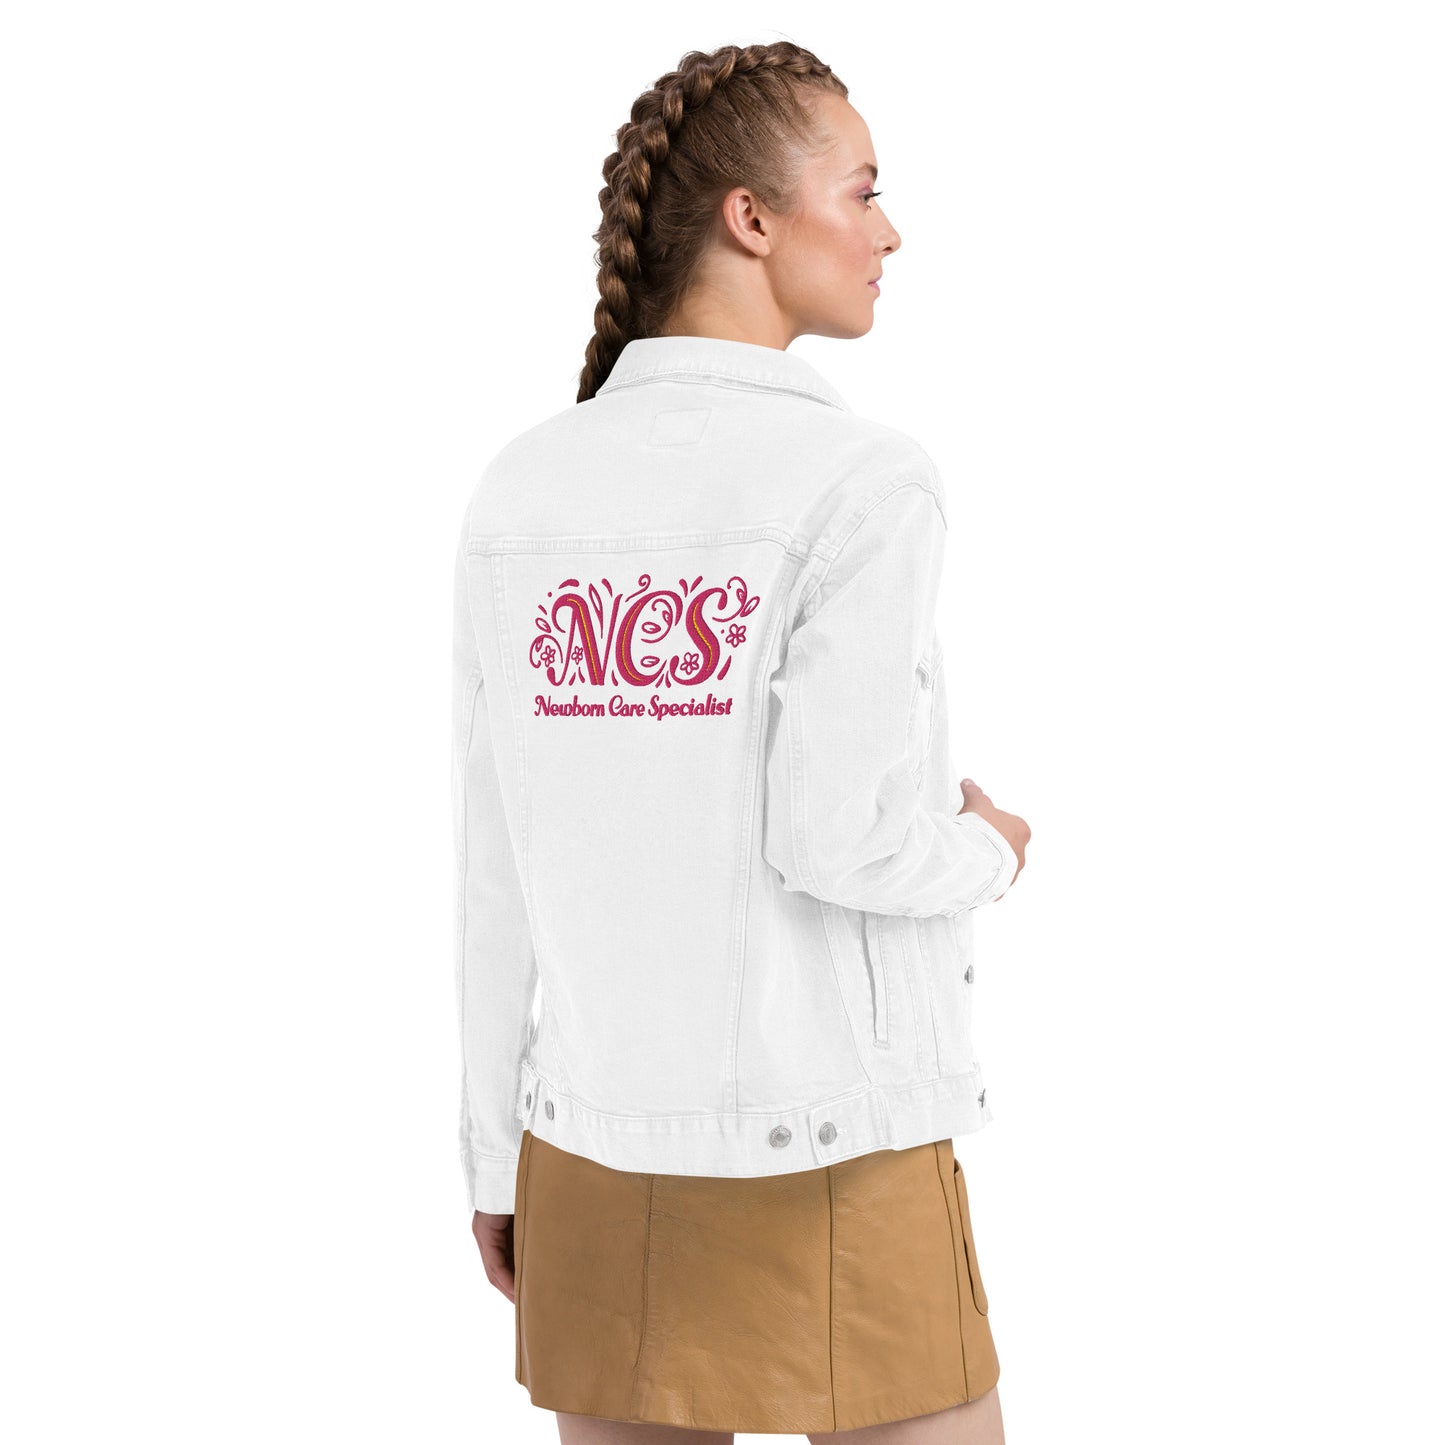 NCS embroidered denim jacket by The Nanny Store